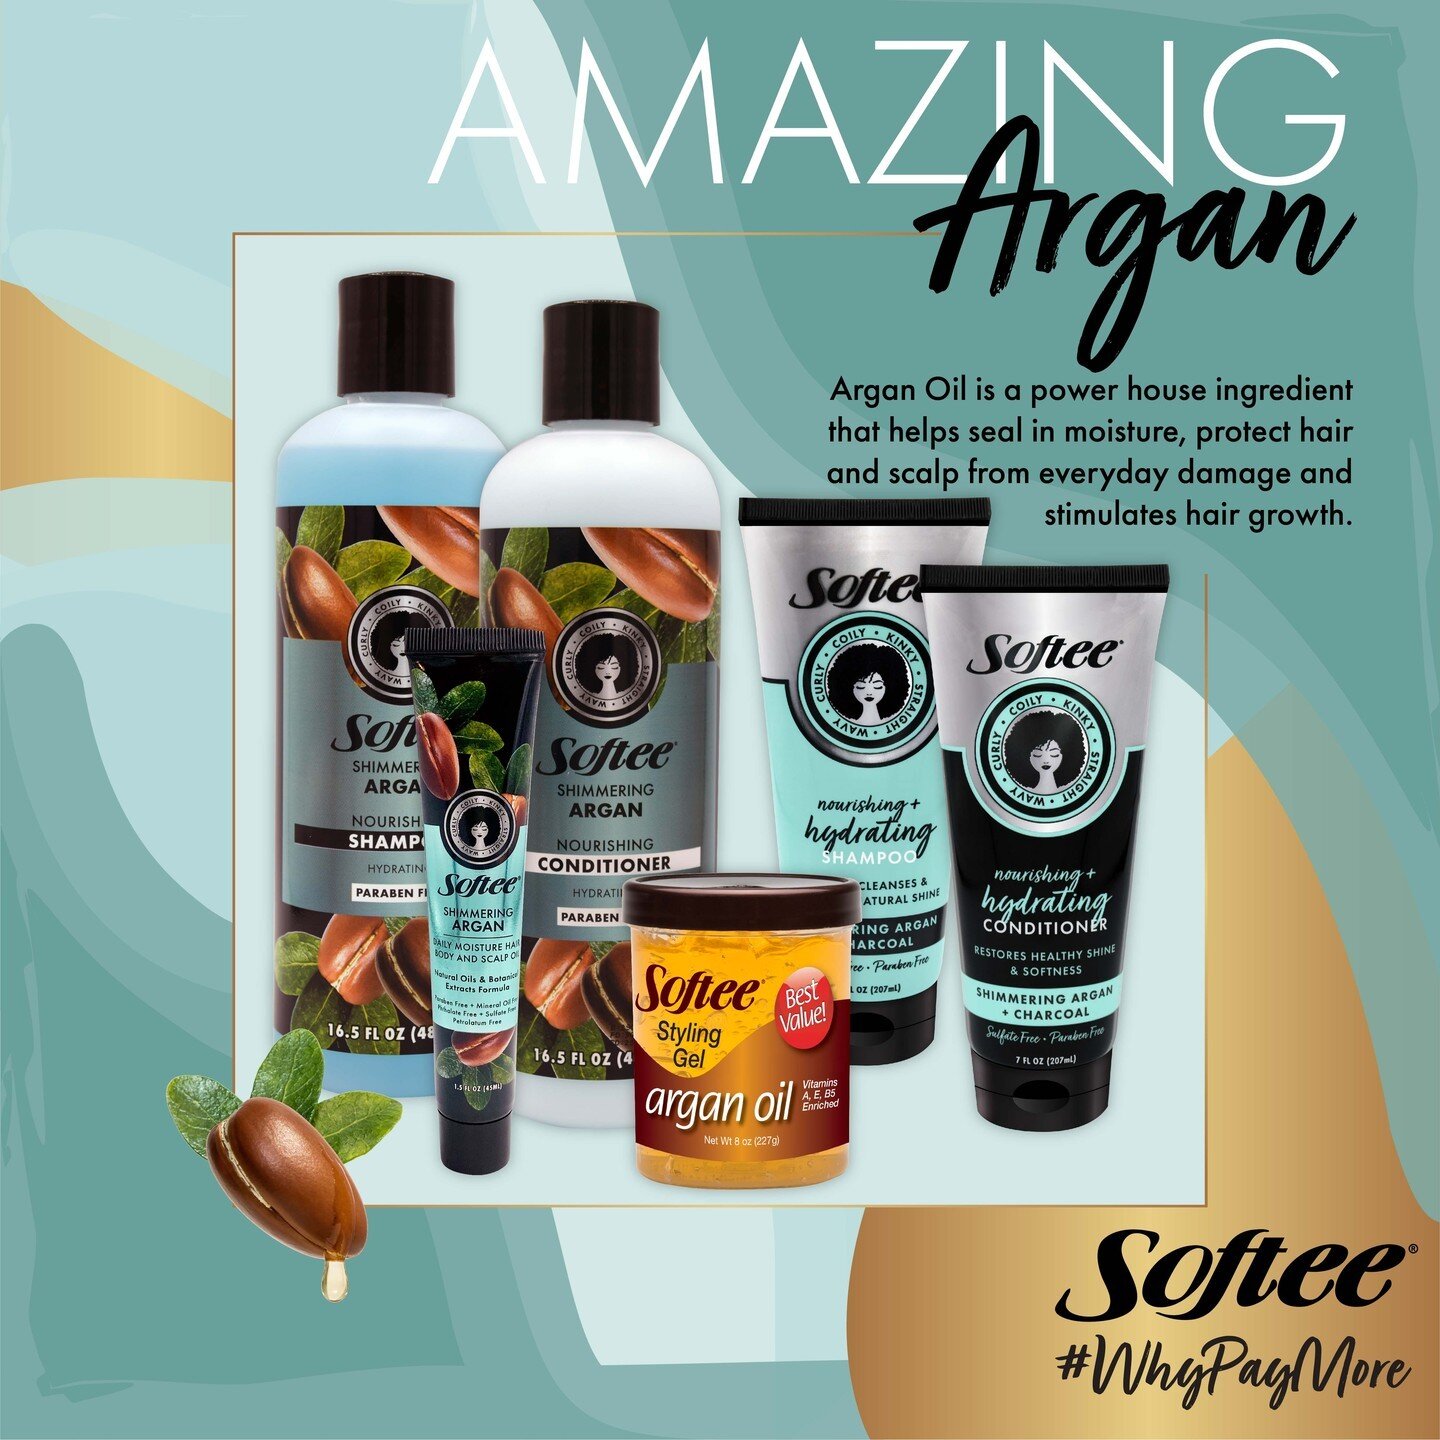 ✨ The Power of Argan Oil ✨

Softee Products has created products around this ingredient to bring you the BEST in haircare. Try Softee Nourishing Shimmering Argan Shampoo and Conditioner for the ultimate wash day experience or Softee Charcoal Infused 